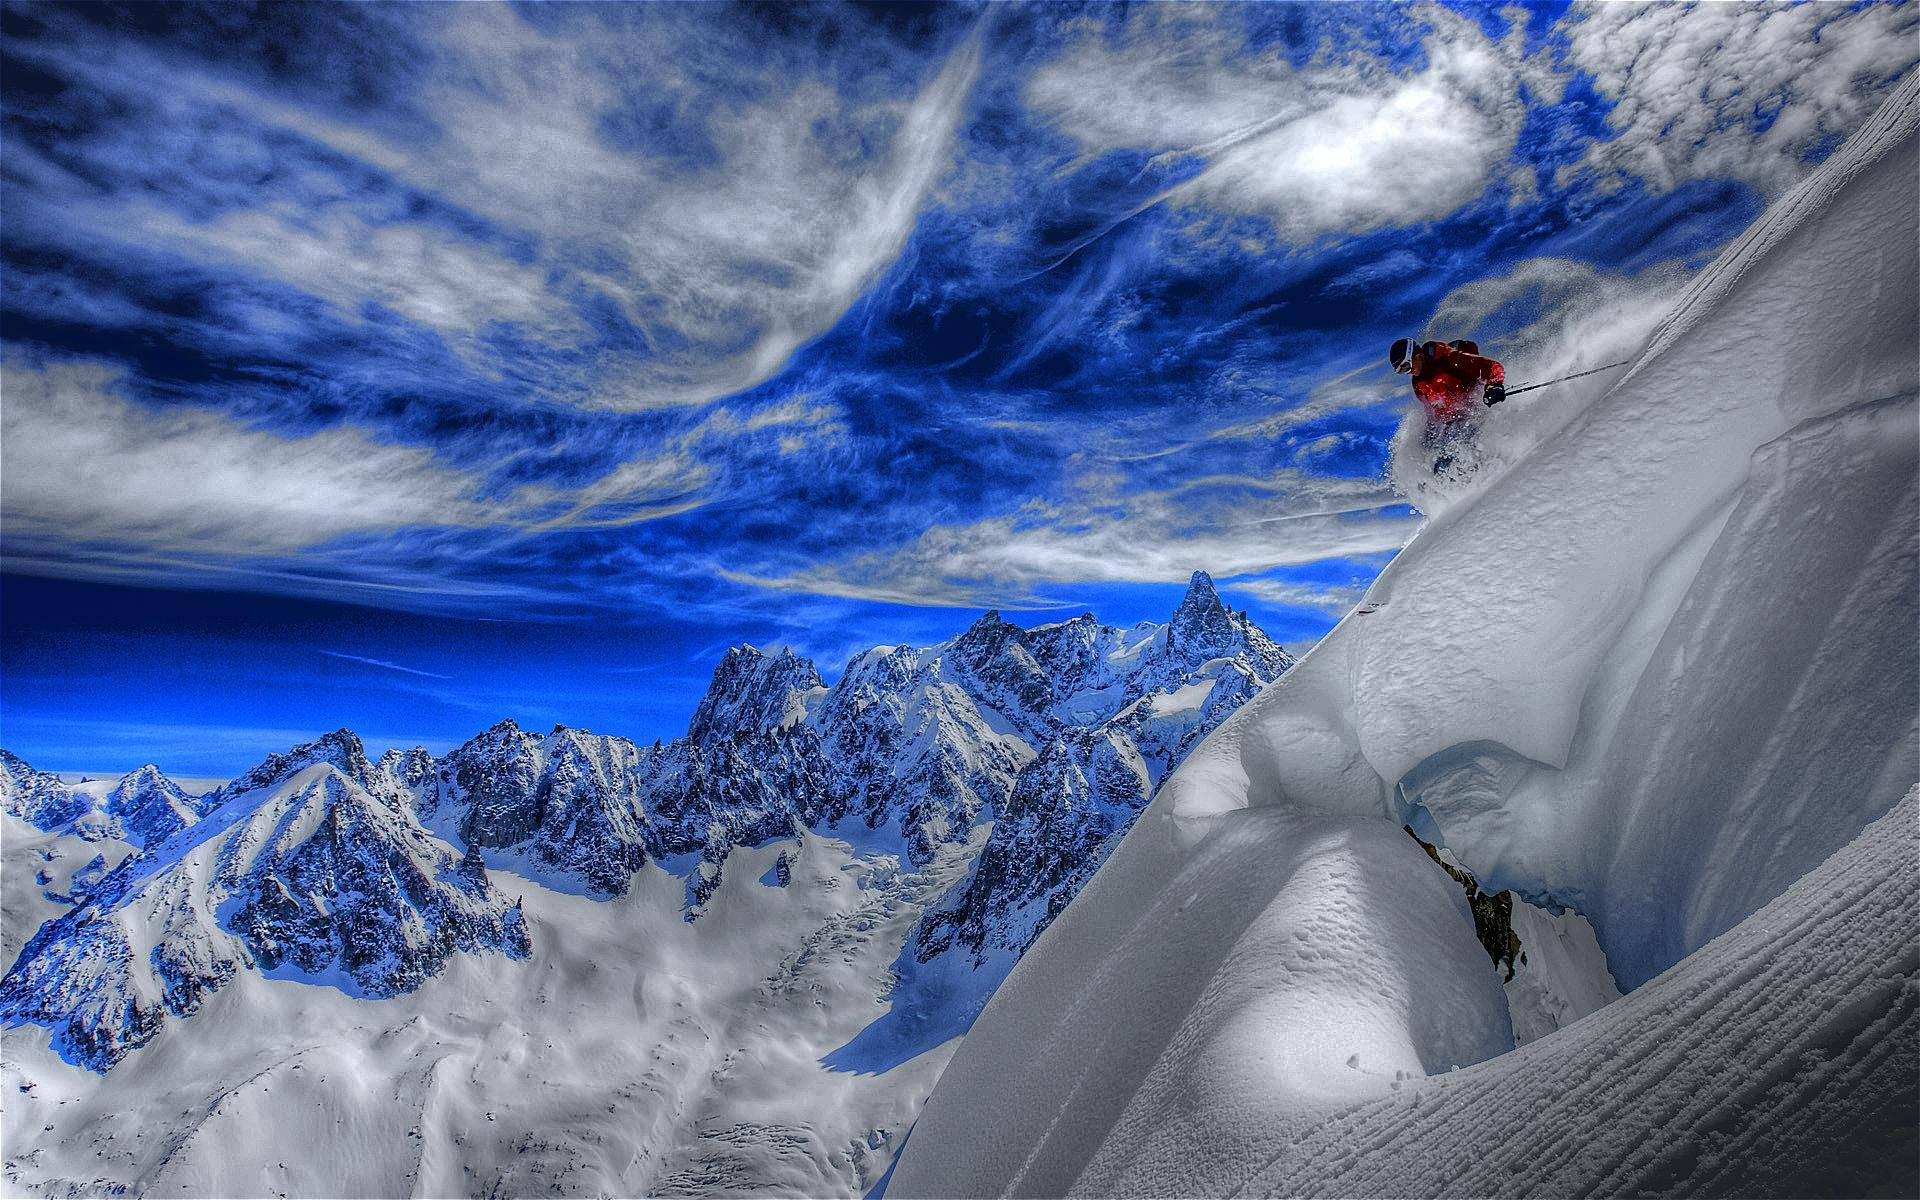 Caption: A Breathtaking View of Snow Mountain Skiing Wallpaper